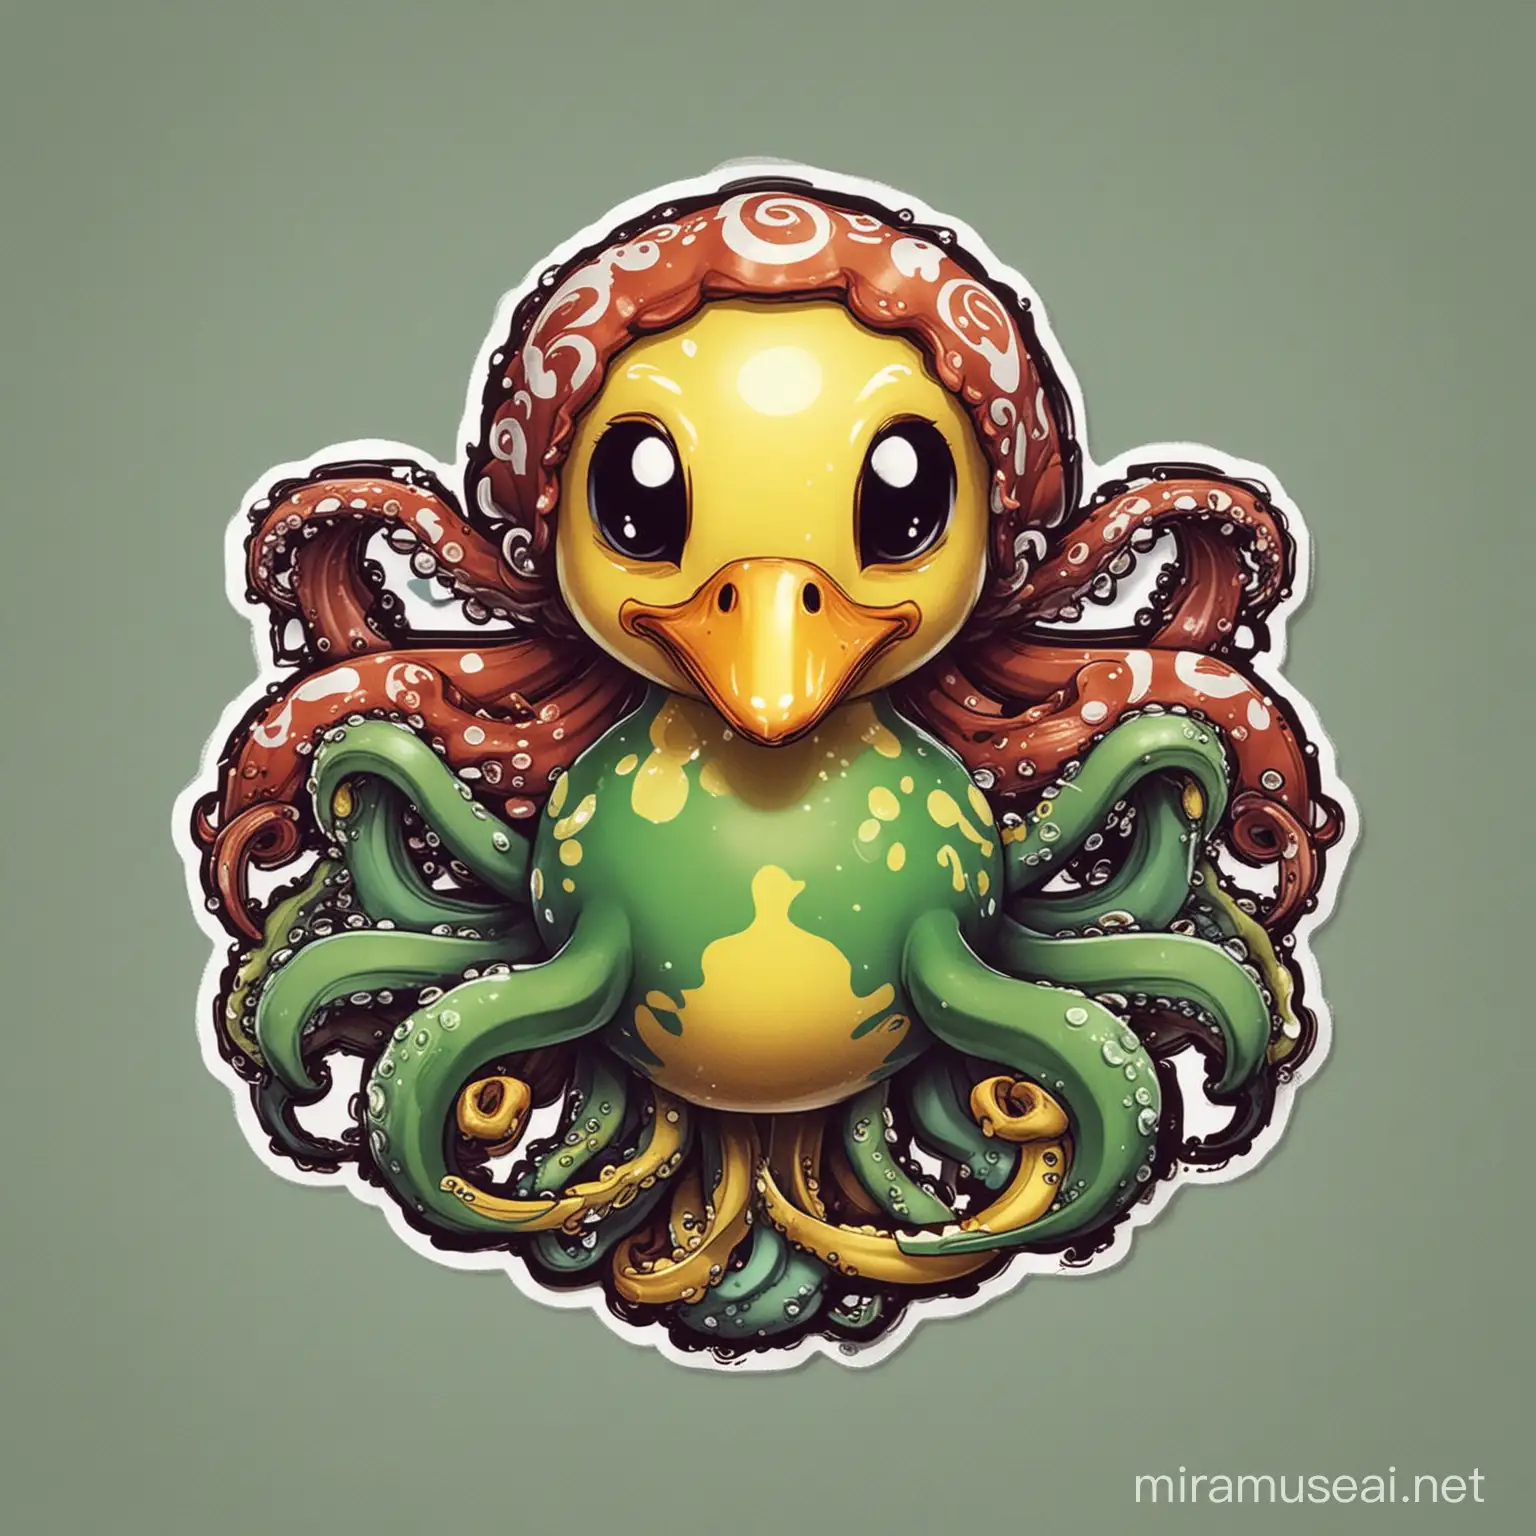  (cel shading, clipart, die cut sticker,) rubber duck octopus hybrid, rubber duck with eight tentacles for feat, (legend of Zelda wind waker art style cel shading) 
TENTACLE, WIGLY ARMS, Die-cut sticker, 2d, Adobe, vector illustration, centered, sharp, smooth, 2d flat, white canvas,